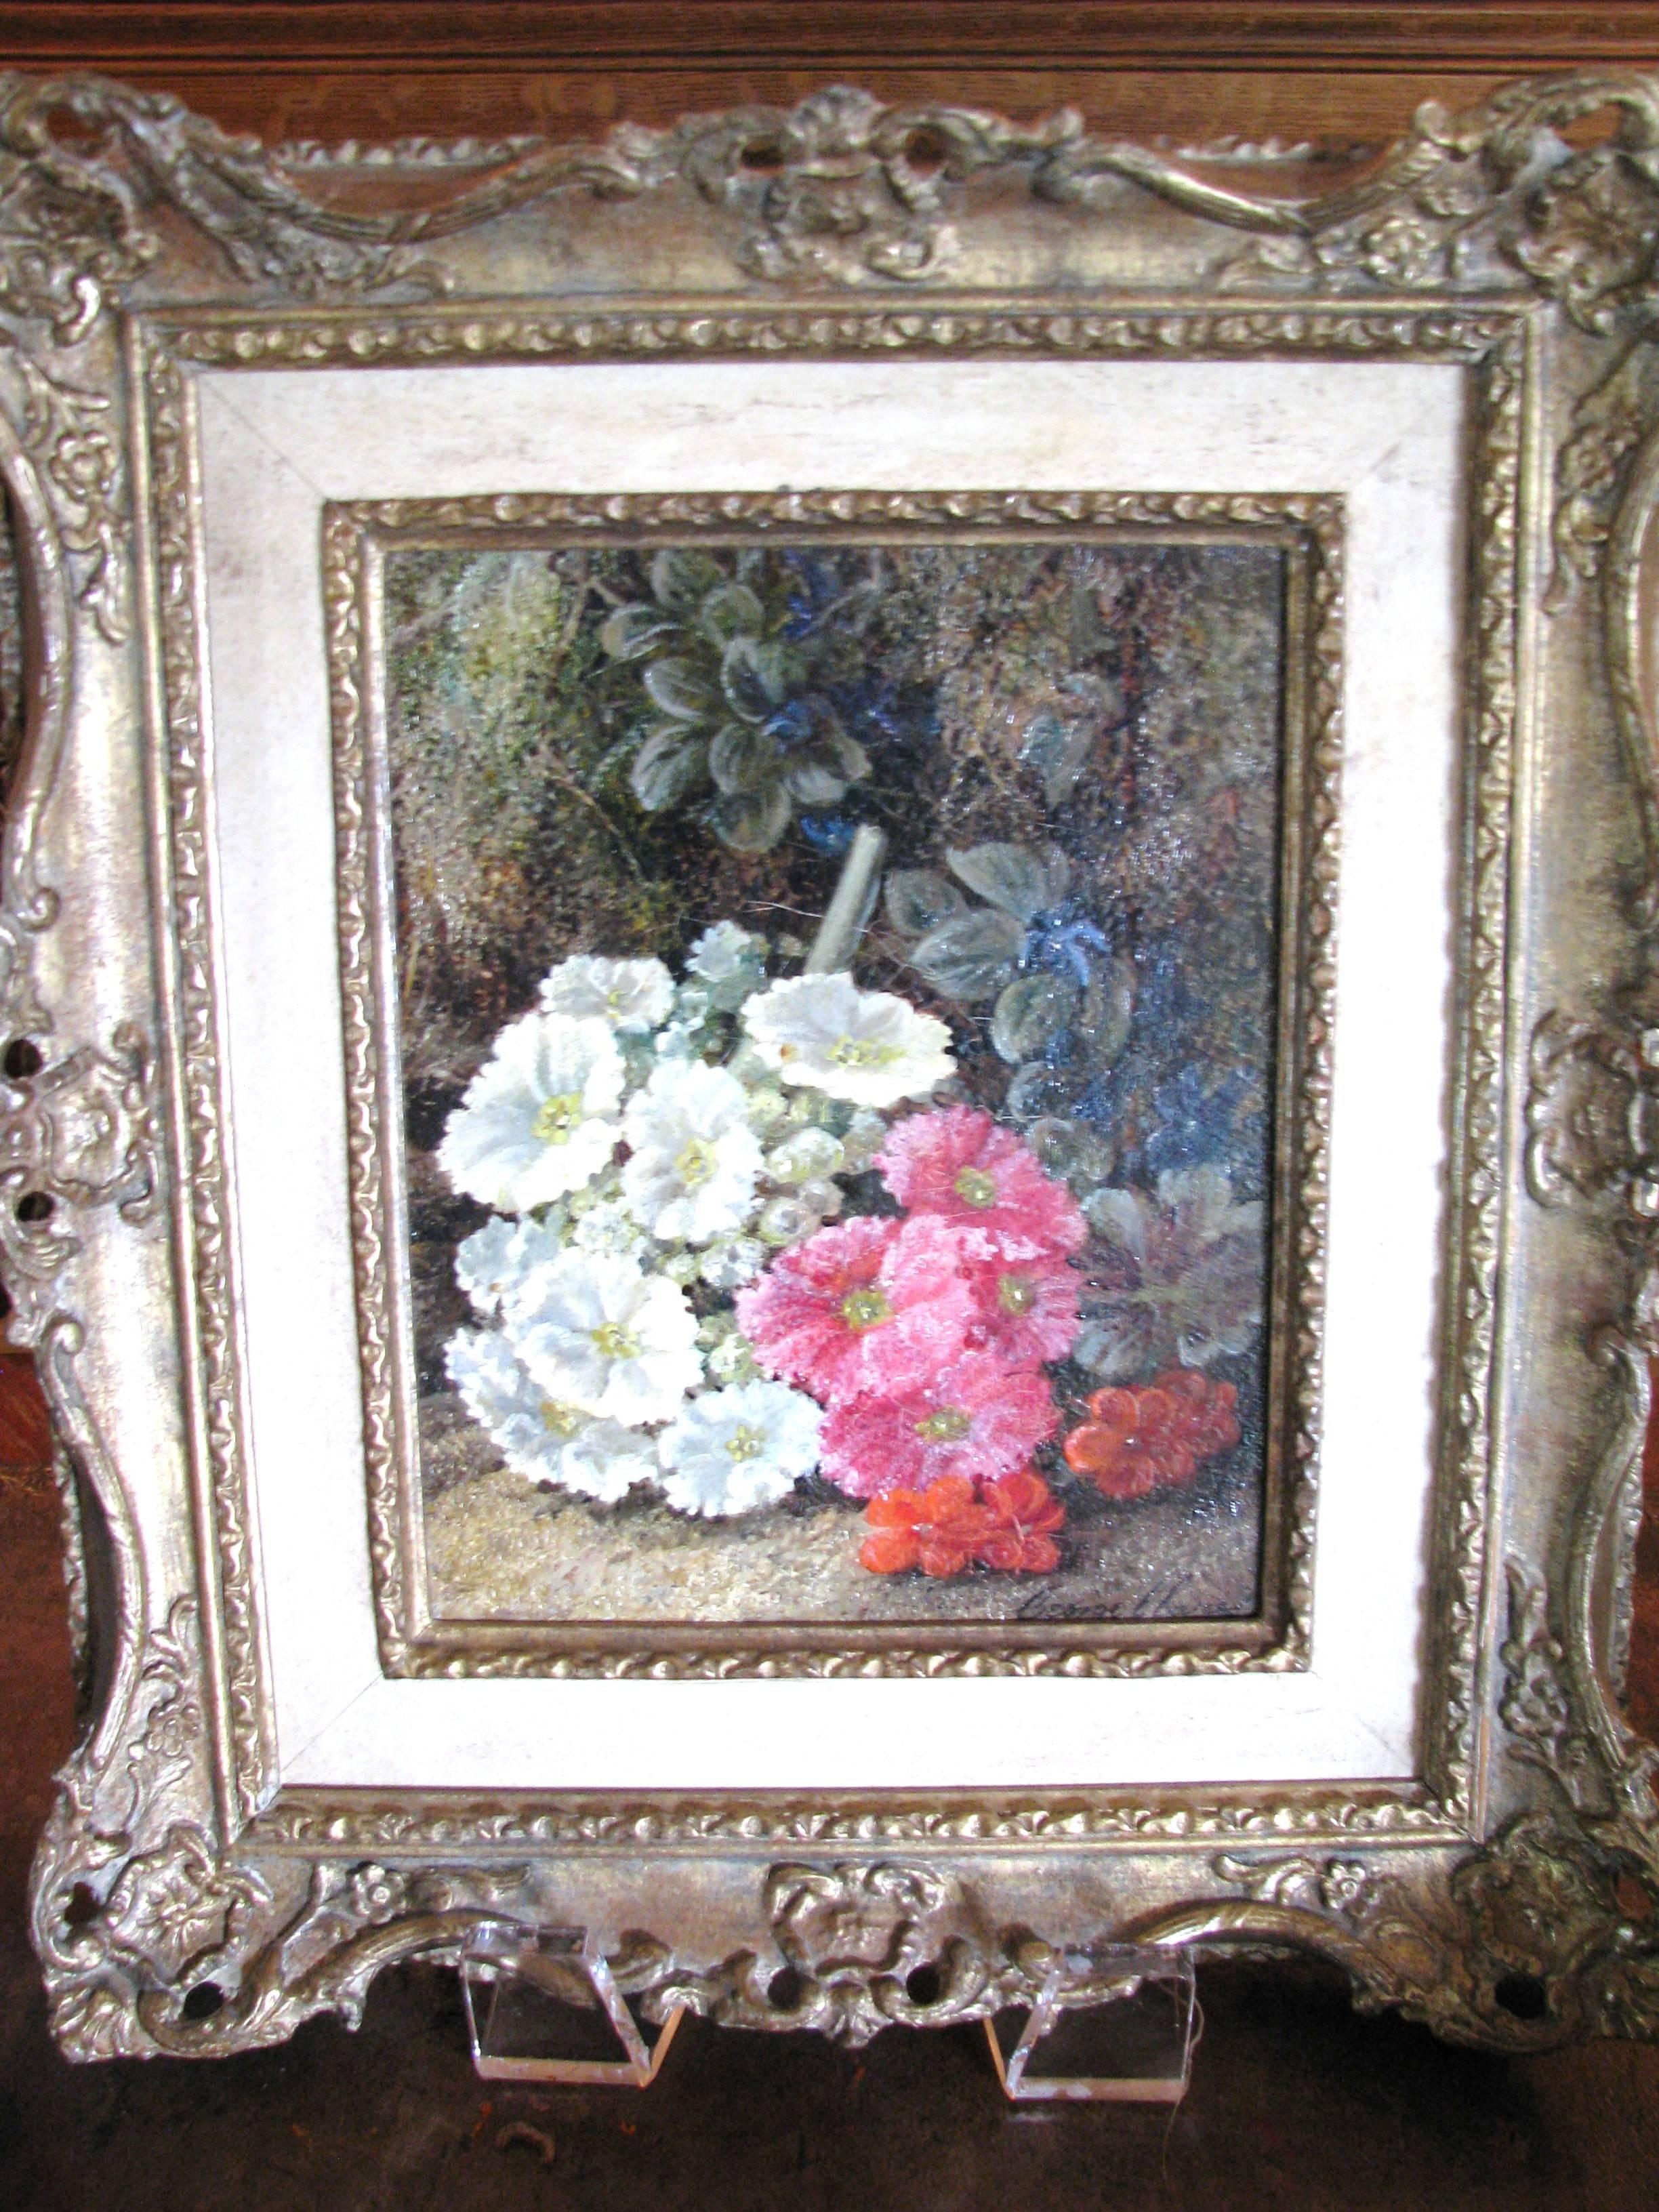 Charming floral painting on board by the well-known Victorian artist, George Clare. In excellent condition. There are a few very fine lines where the paint shows some separation (please see photos), but the surface is stabile and solid.

 The